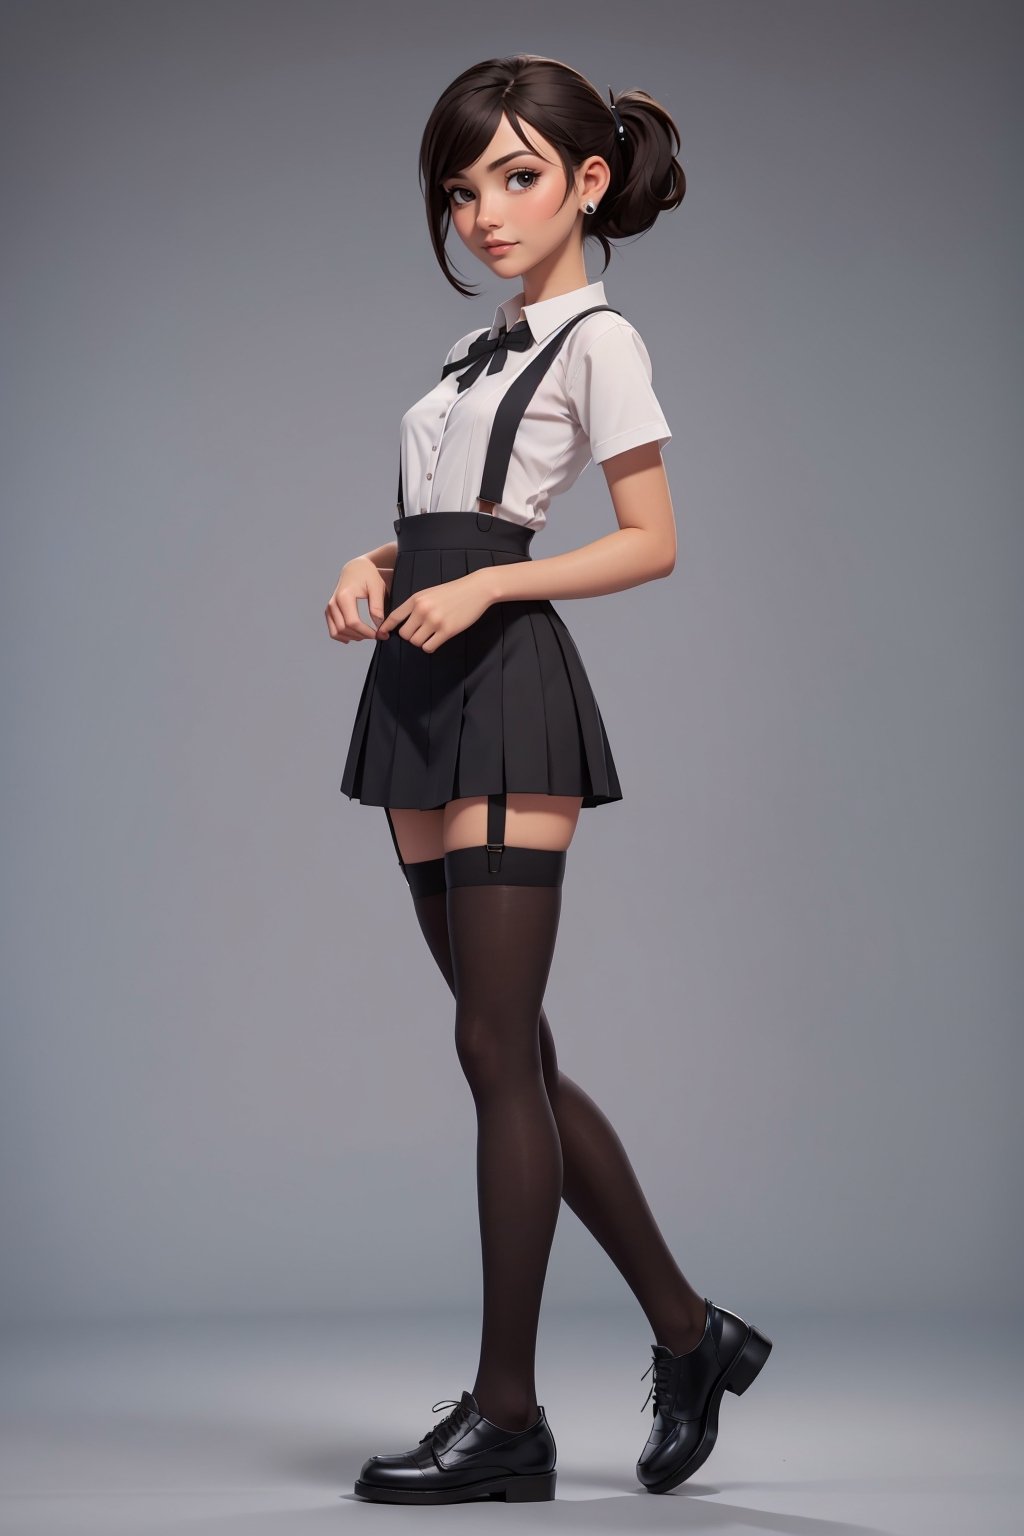 character sheet, student clothes, beautiful, good hands, full body, looking to the camera, good body, 18 year old girl body, school shoes, school skirt, school shirt, black shoes, sexy pose, full_body, with small earrings, character_sheet, fashionable hairstyle, school_uniform, shoes_black, with  school_shoes_black, arcane style, clothes with accessories, denier tights in beige, stockings_colorbeige, Reclaimed Vintage side cut out tights in black, clothes sexy, Bluebella garter suspender in black,brown hair, straight hair, fair skin, light eyes,ring on finger